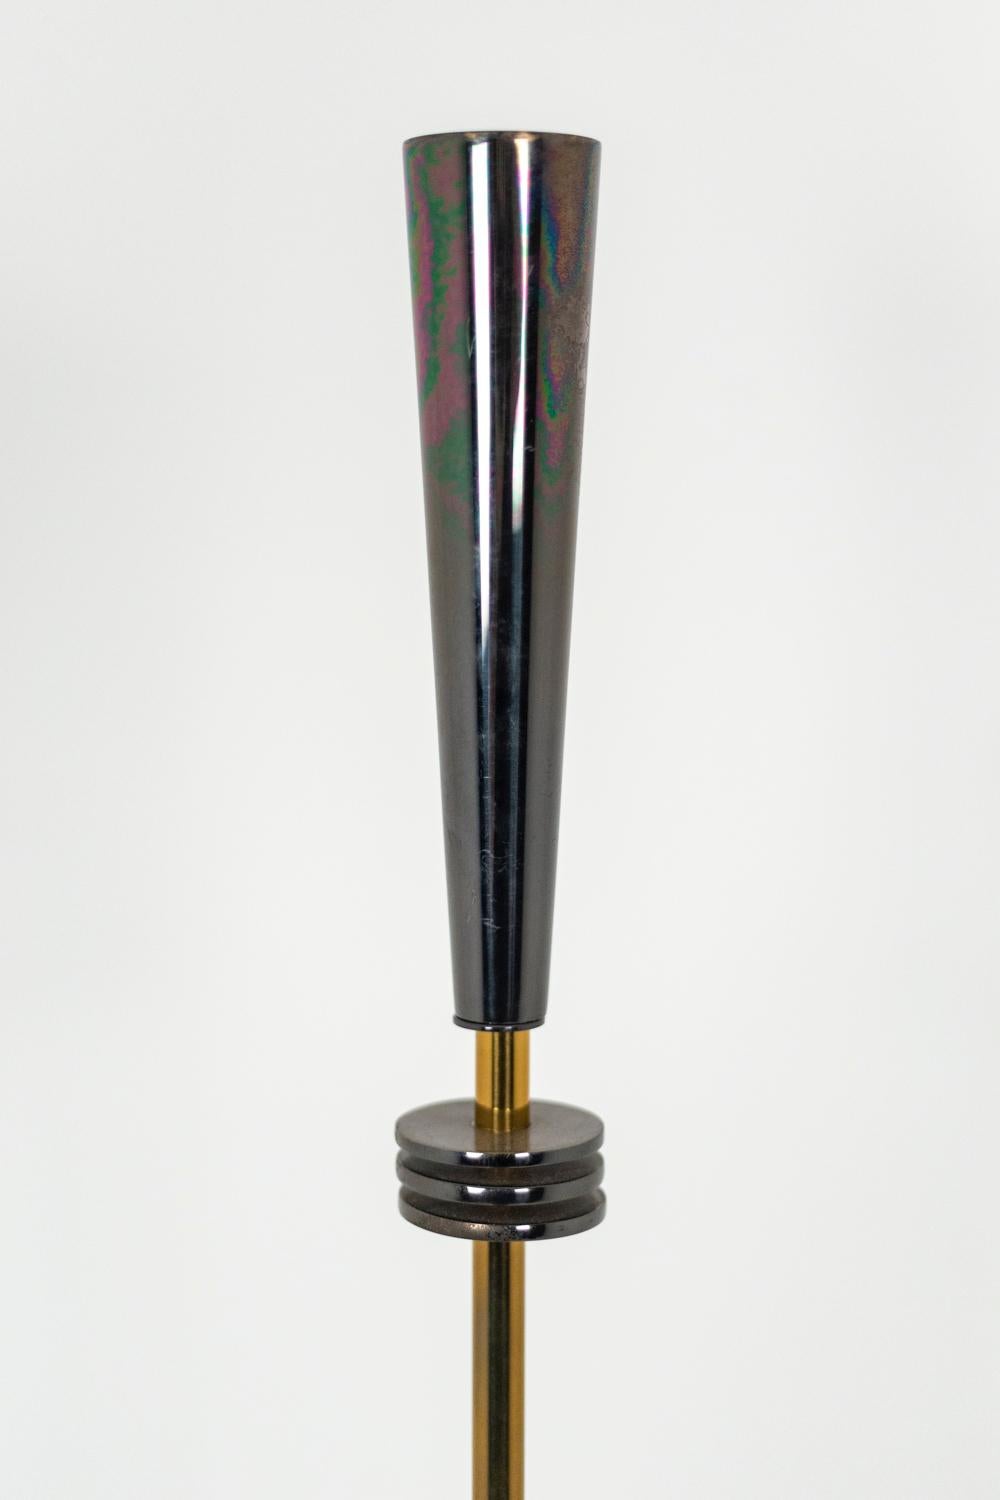 Maison Charles, attributed to.
“Quasar” floor lamp in metal. Iridescent conical lampshade above three parallel disks on the gilt leg. Circular base on two levels.

Work realized in the 20th century.

Work referenced 2268-0 in the Maison Charles